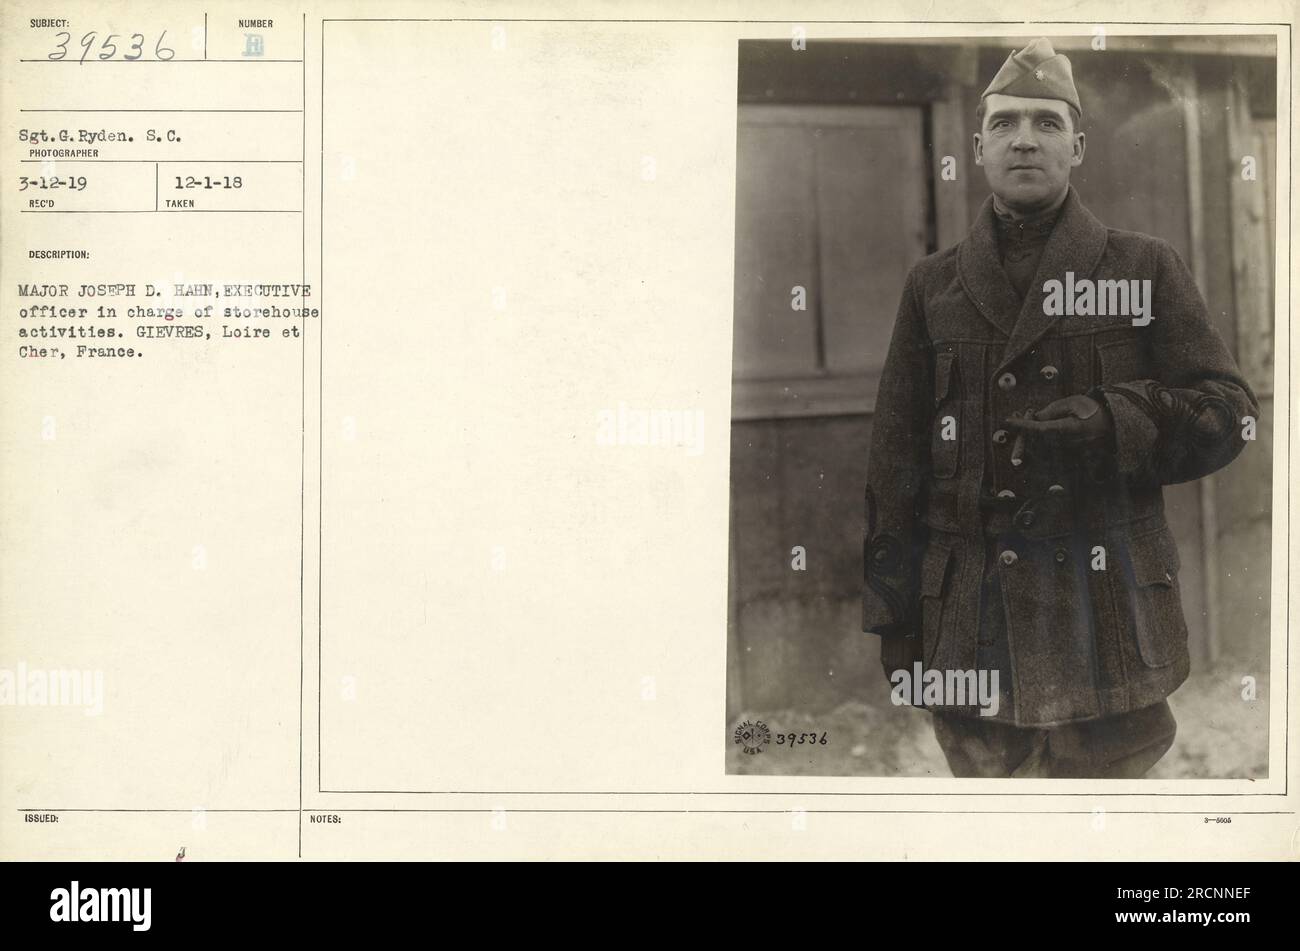 Sergeant G. Ryden captured this photograph on March 12, 1919, depicting Major Joseph D. Hahn, the executive officer in charge of storehouse activities at Gievres, Loire et Cher, France. The photograph is labeled with the issued number 12-1-18. (111-SC-39536) Stock Photo